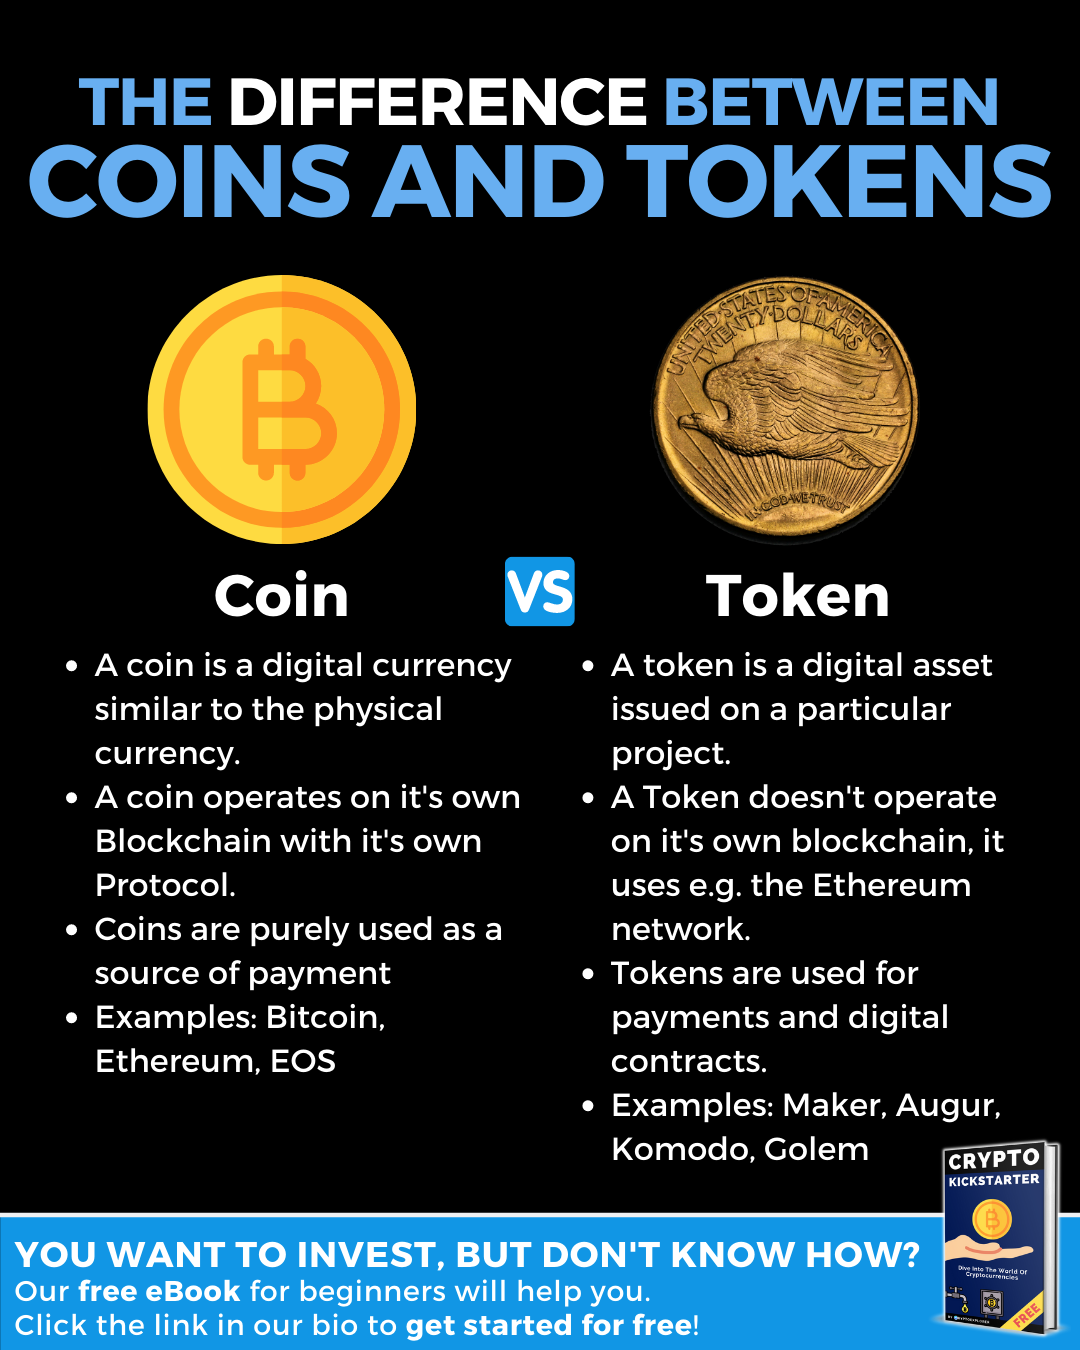 Token vs Coin: What's the Difference?